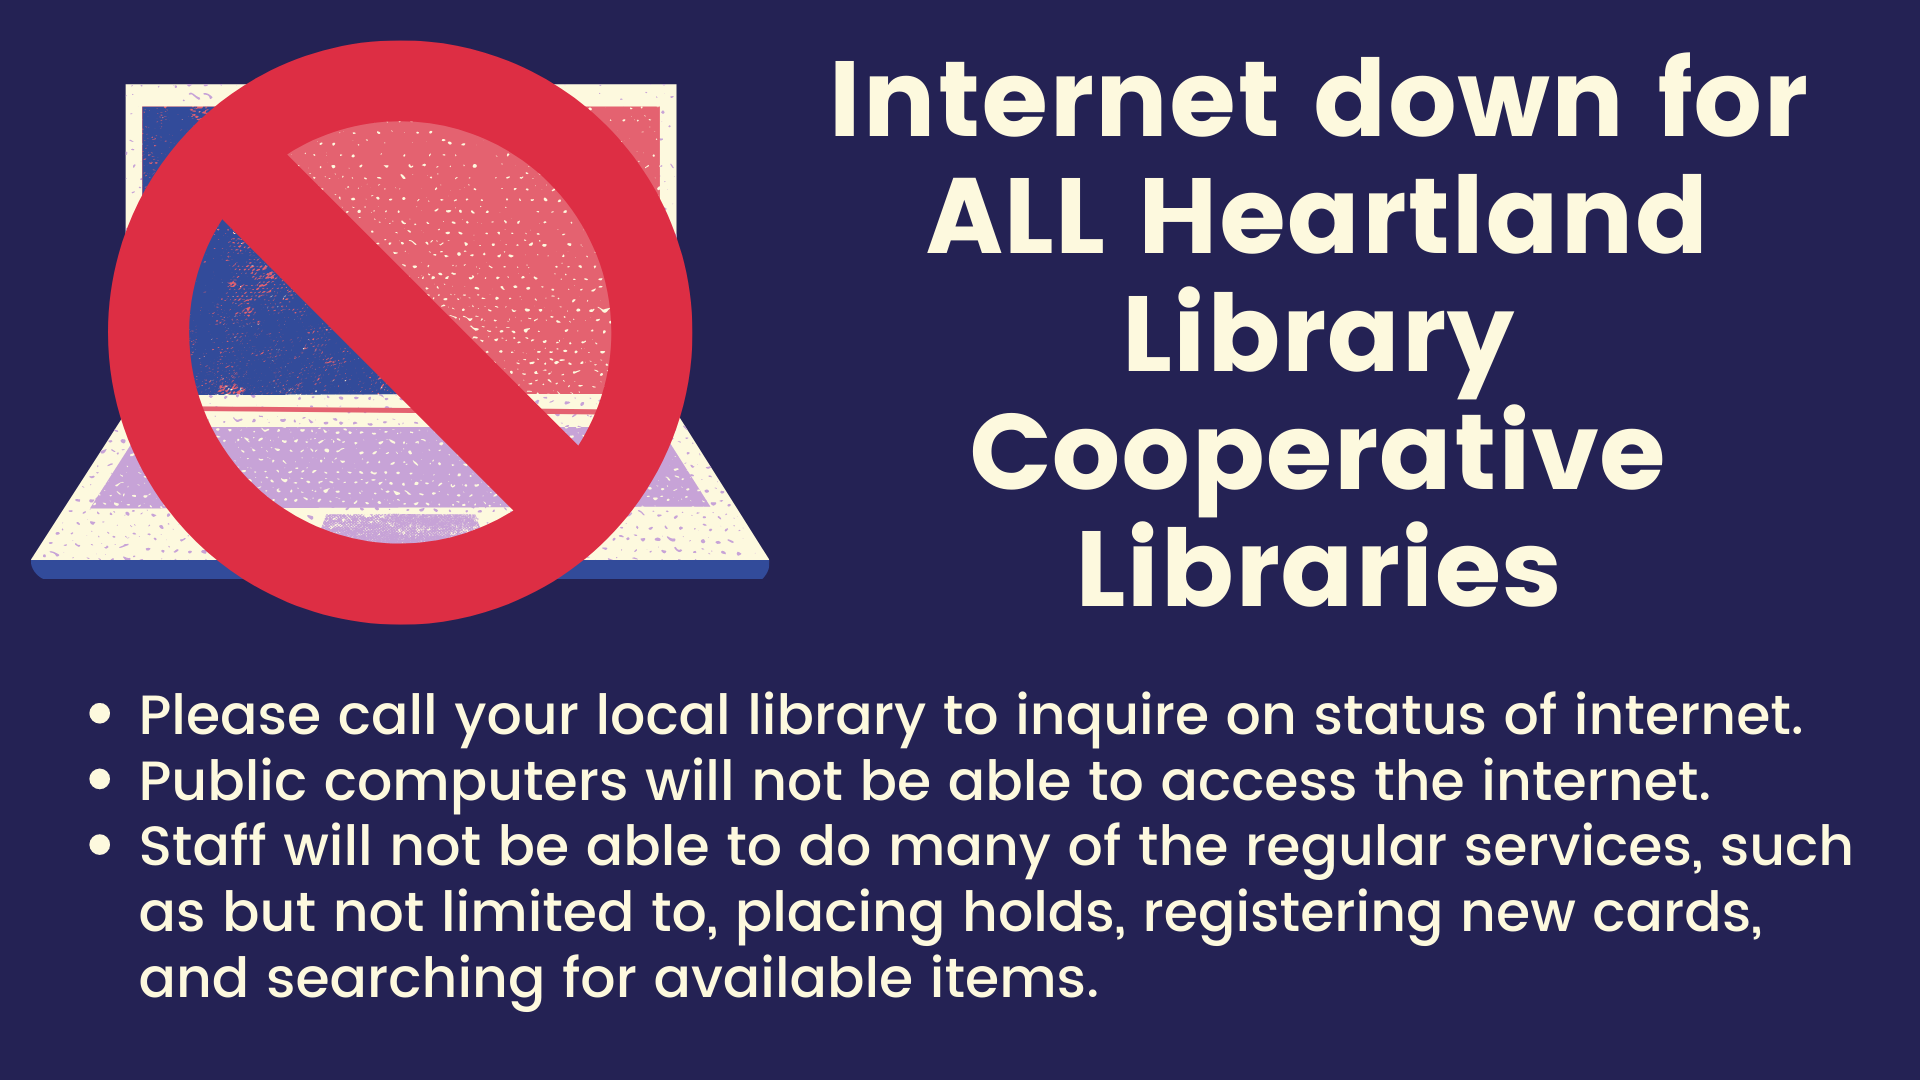 Internet is down at ALL Heartland Library Cooperative Libraries. Please call your local library to inquire on the status of the internet and services available.